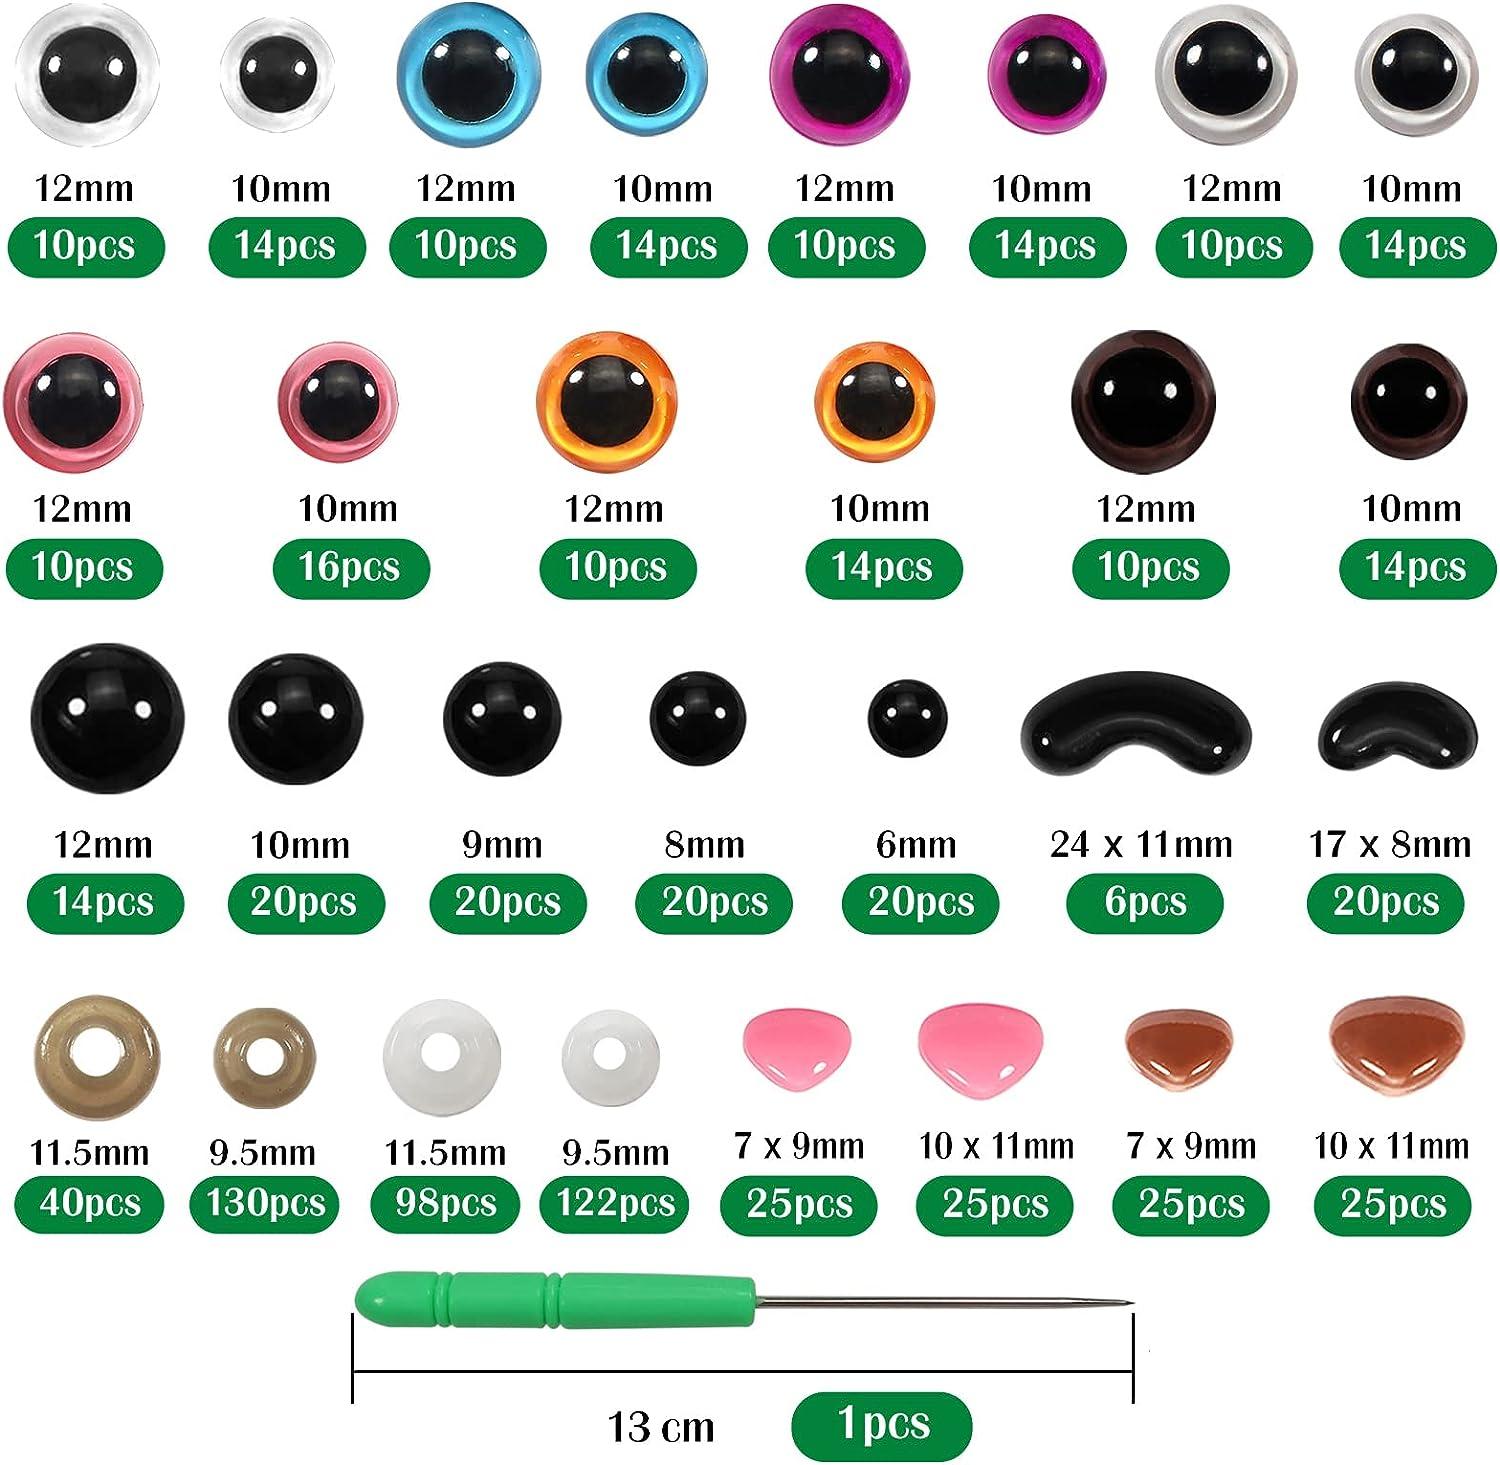  TOAOB 736pcs Safety Eyes and Noses for Amigurumis Crafts Doll  Eyeballs 3mm to 12mm Plastic Black Craft Eyes for Crochet Stuffed Animals  Bears Doll Making